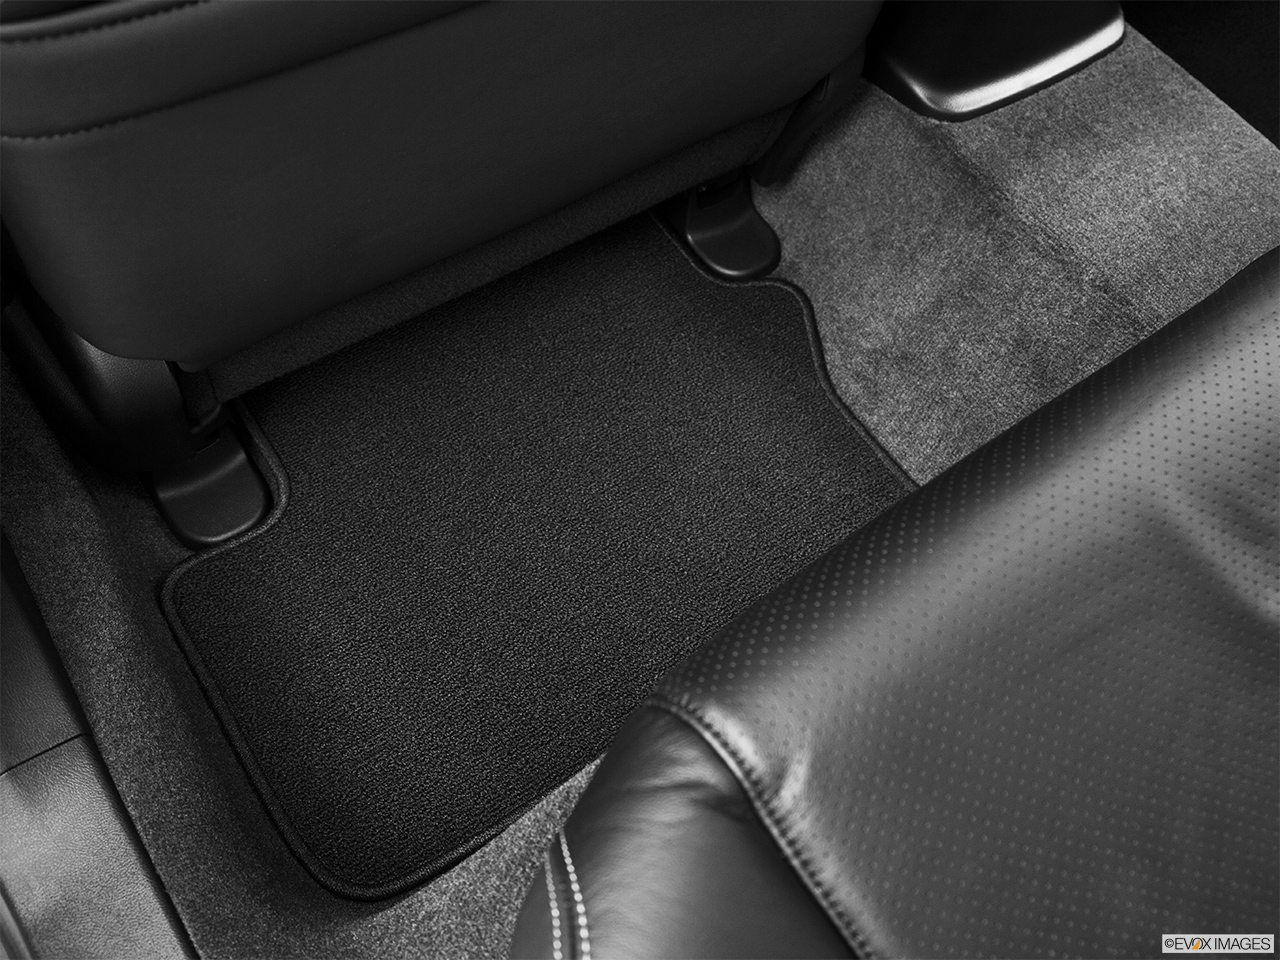 2013 Acura TL SH-AWD Rear driver's side floor mat. Mid-seat level from outside looking in. 